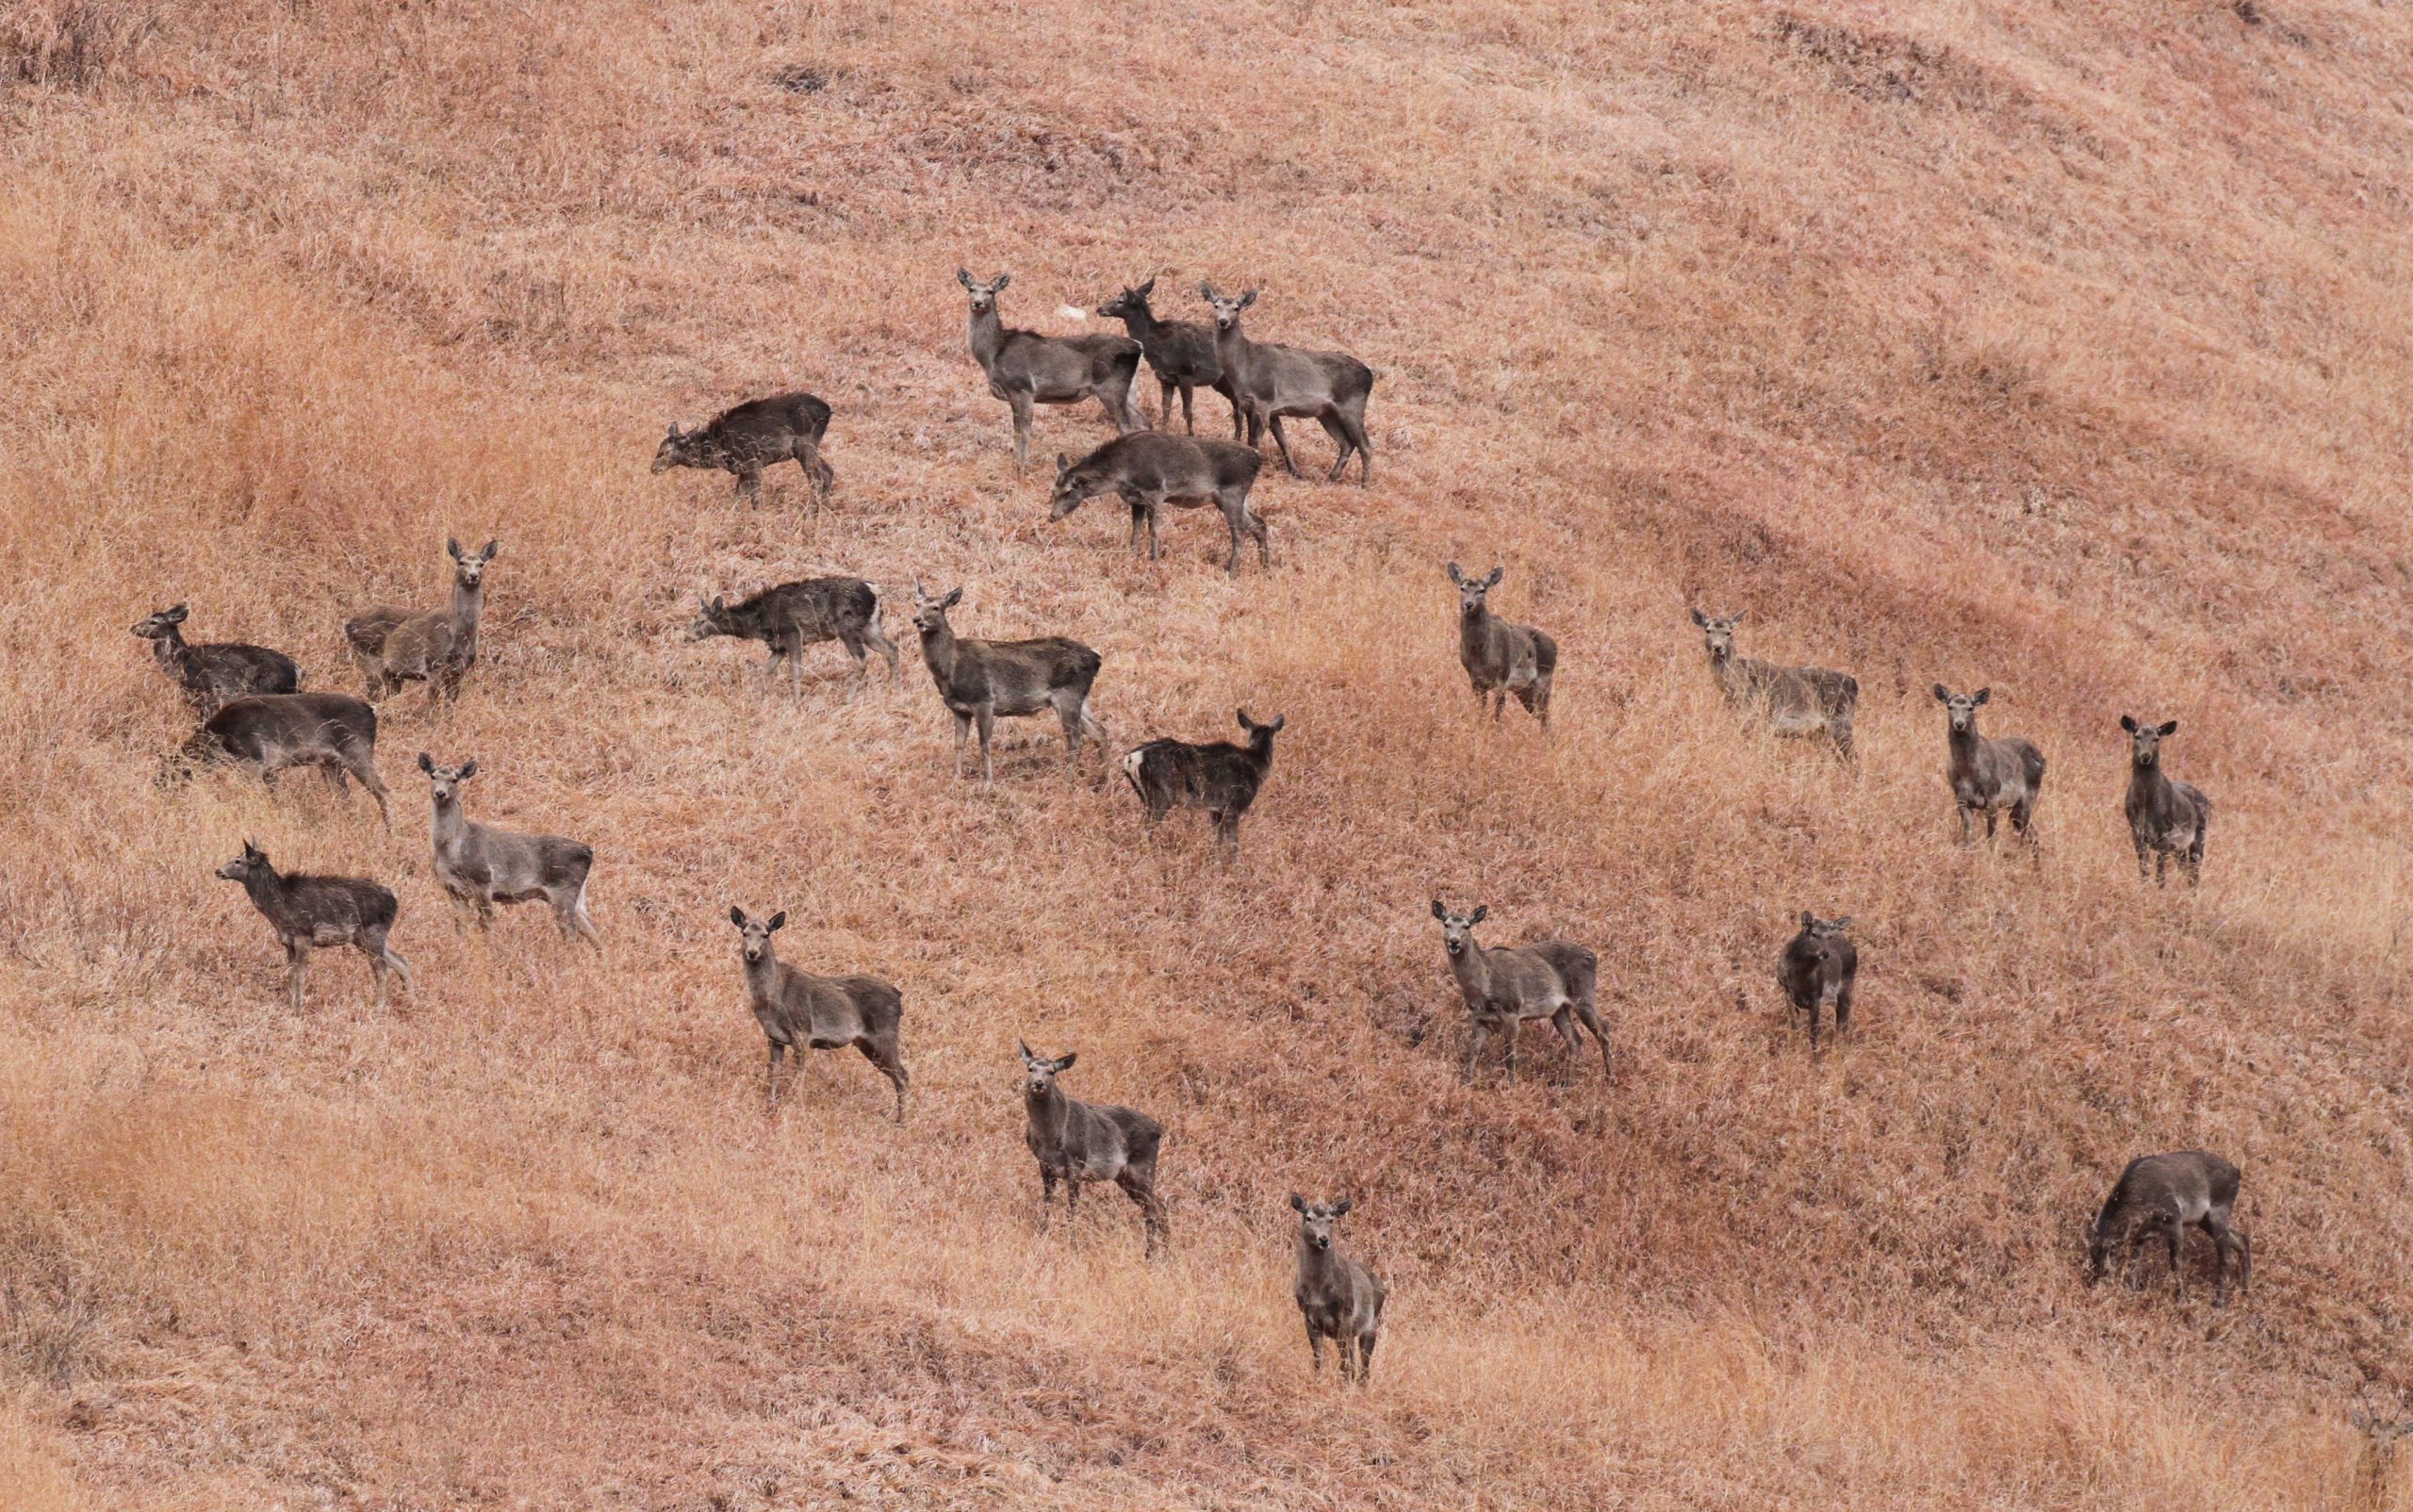 <p>The hangul, or Kashmir stag, is now confined to Dachigam National Park (Image: Tahirshawl)</p>